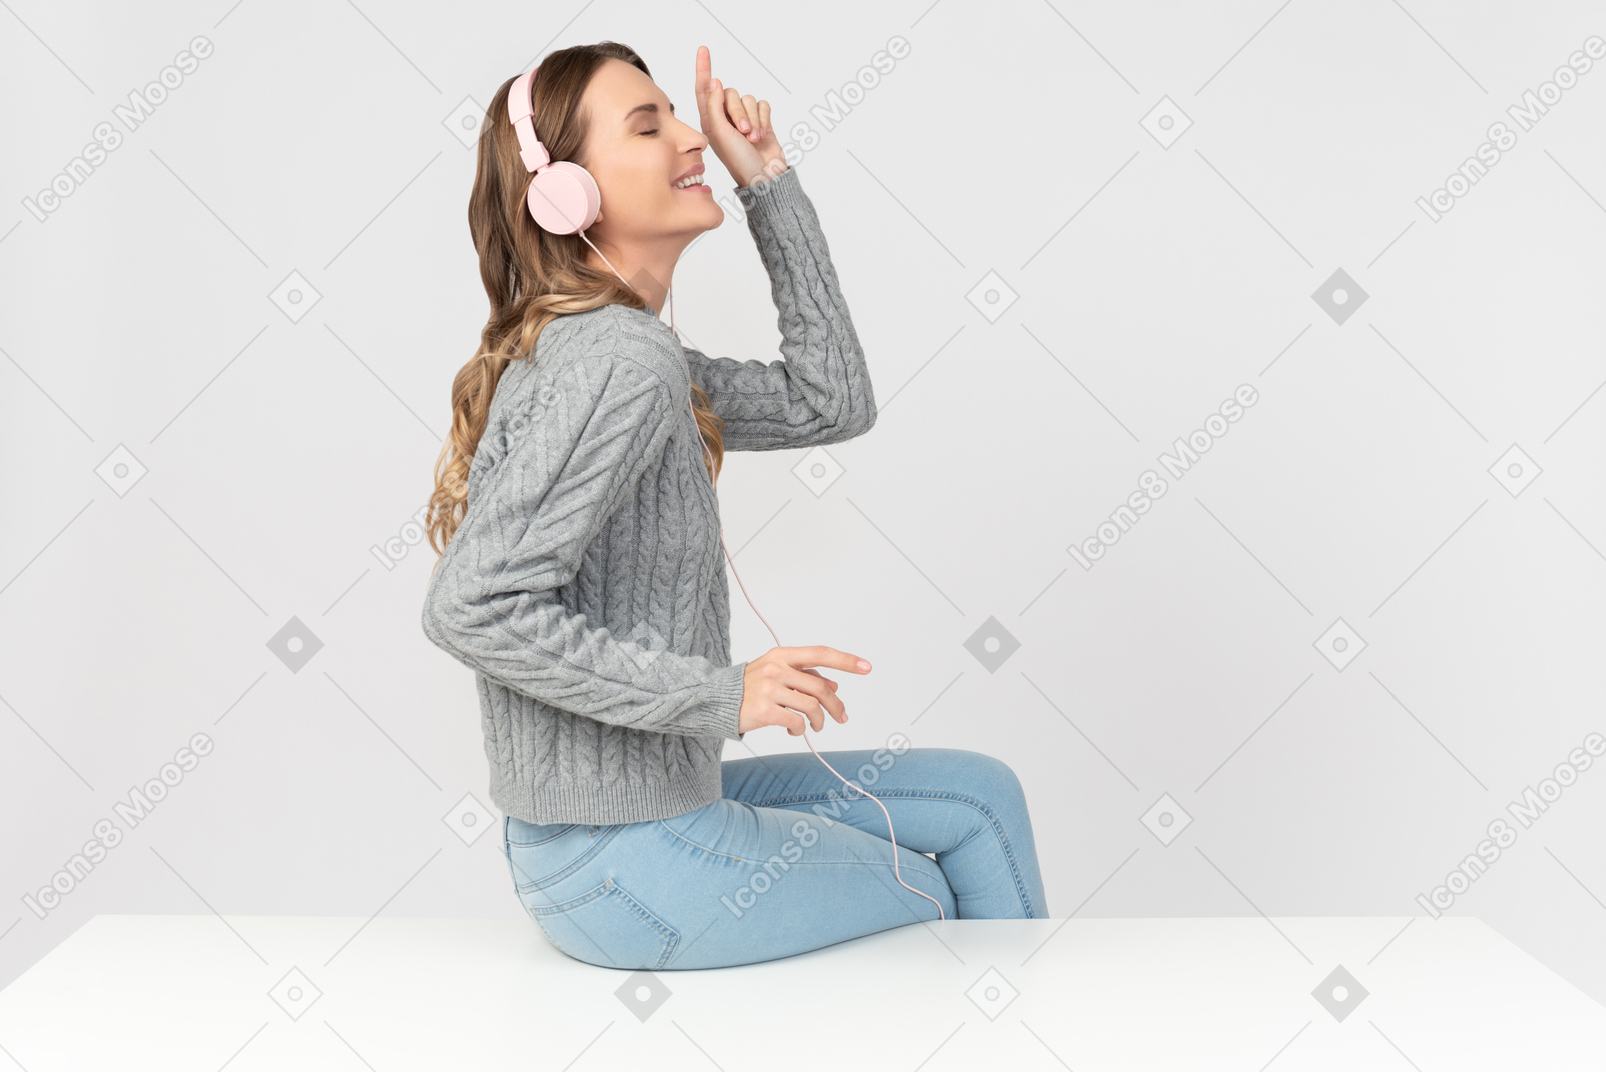 Young woman sitting on the table and listening music in headphones